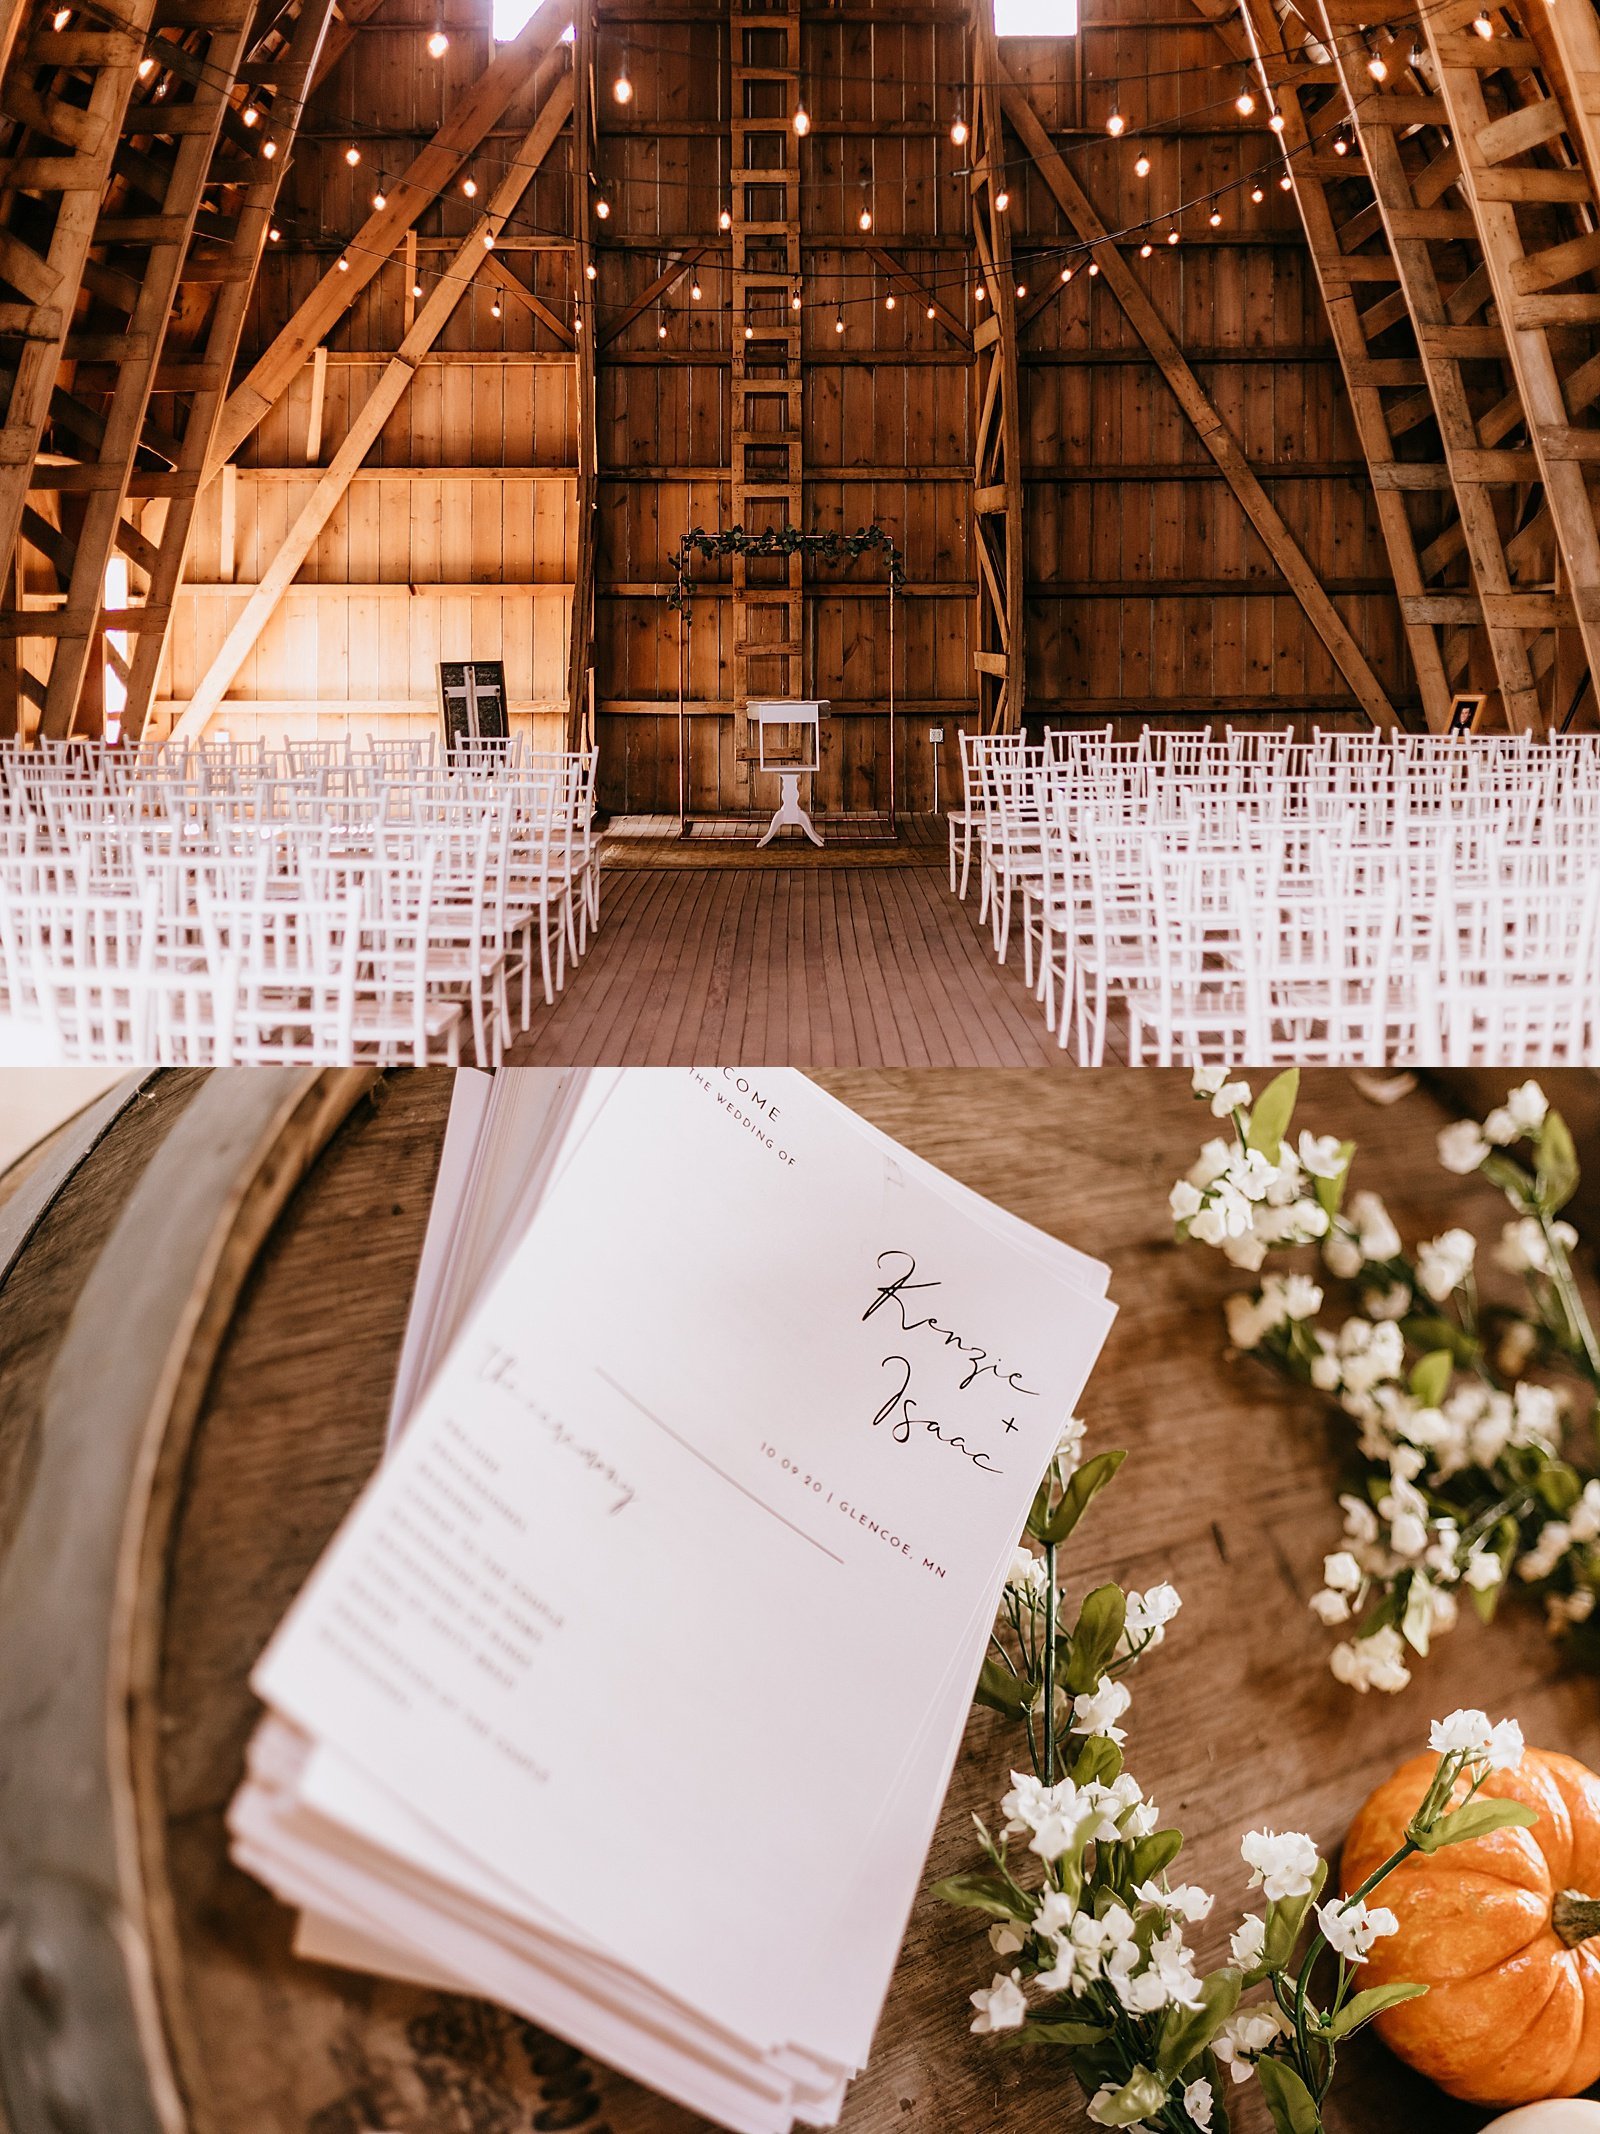  An empty wedding ceremony space at venue in Minnesota before the special day  